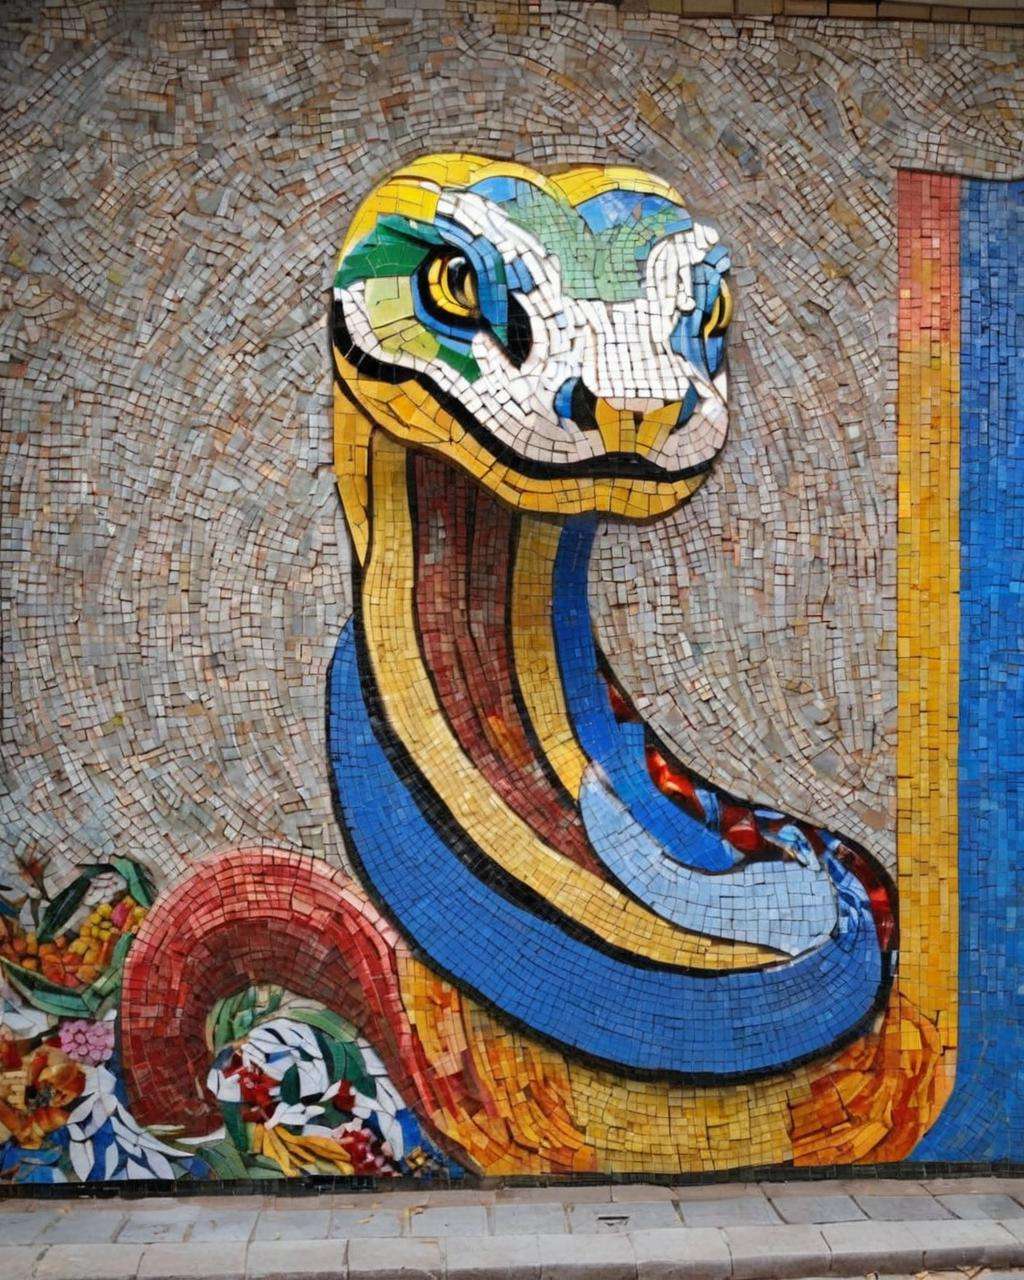 portrait of a Snake ,A mosaic mural:1.0, adorning a public square:0.7, narrates the history:0.3 of the community through vibrant scenes and iconic figures.<lora:mosaic:1.0>